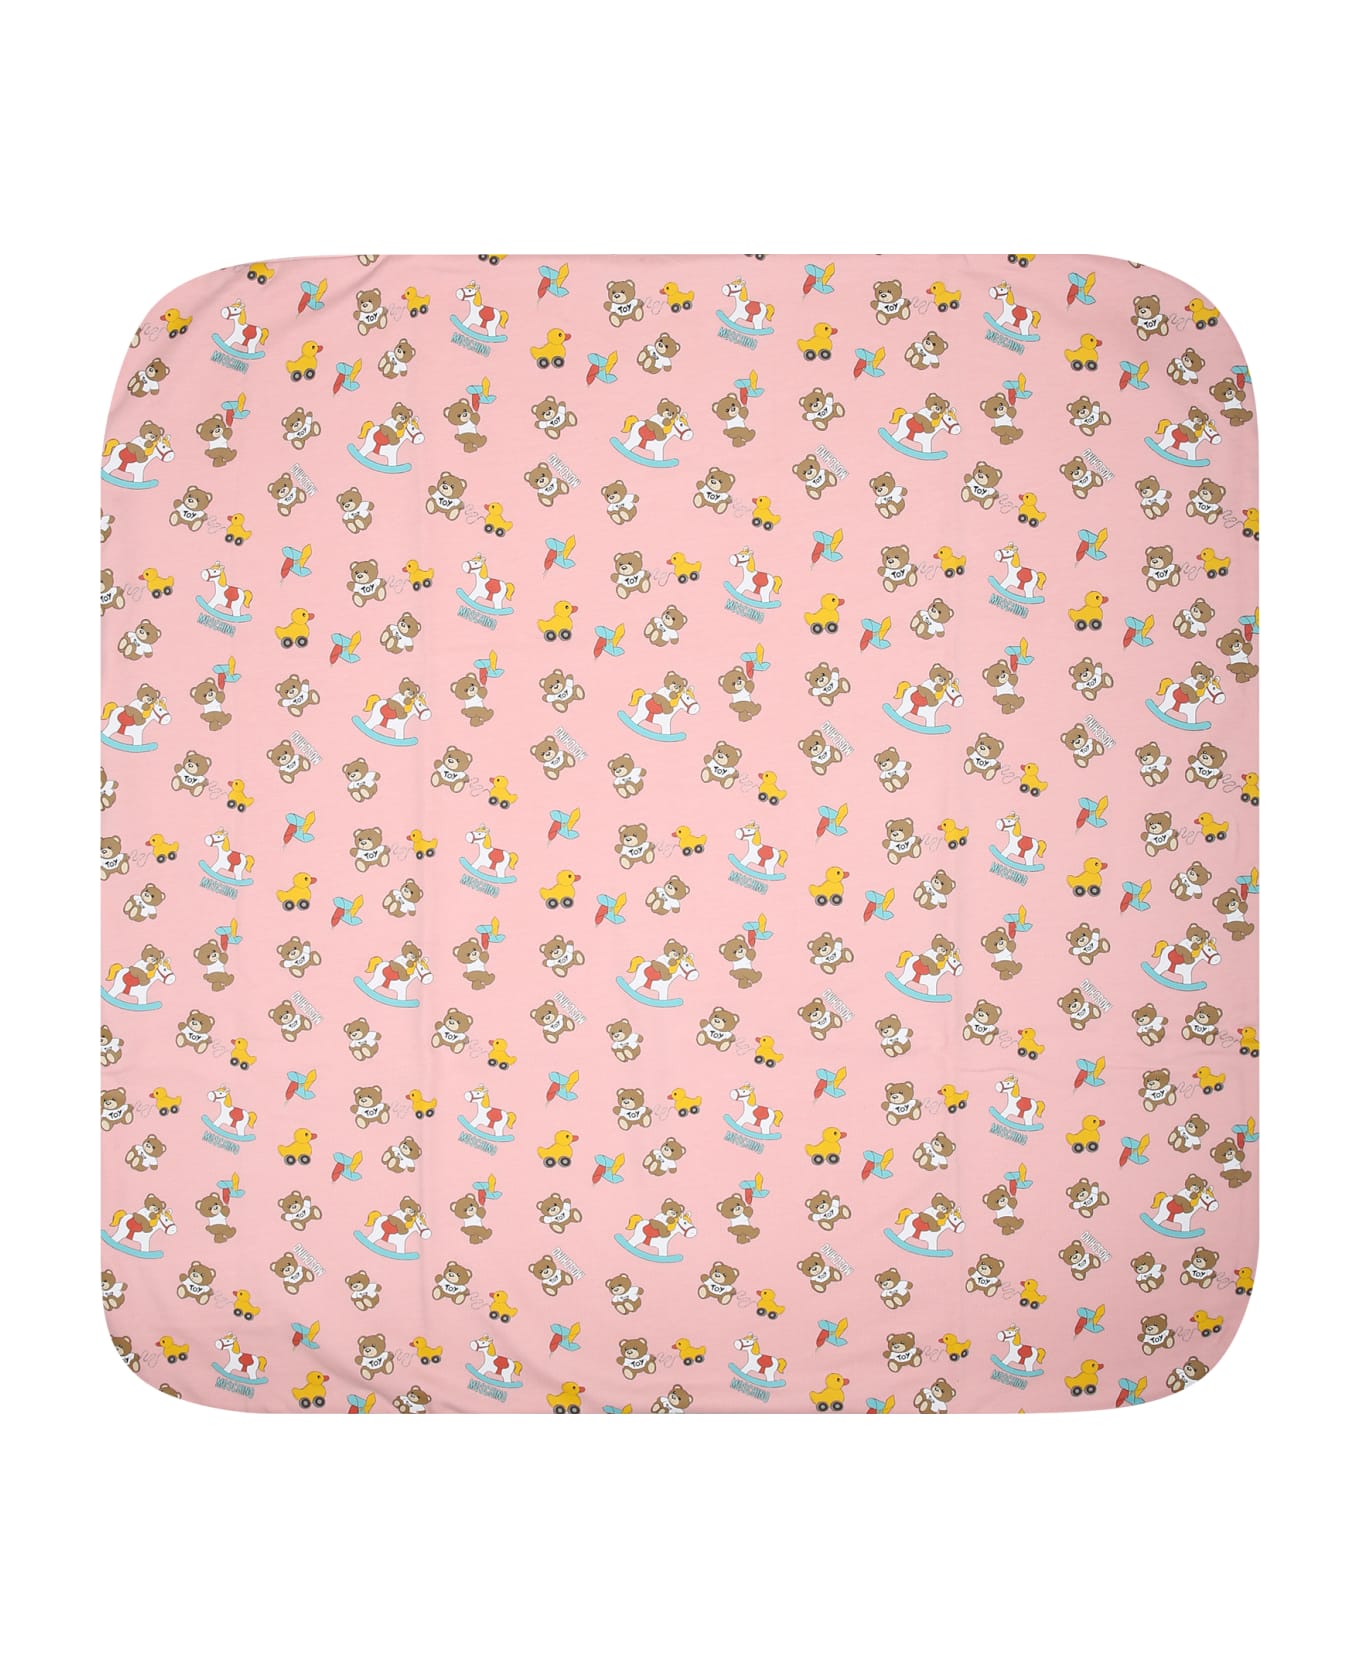 Moschino Pink Baby Girl Blanket With All-over Pattern - Pink アクセサリー＆ギフト